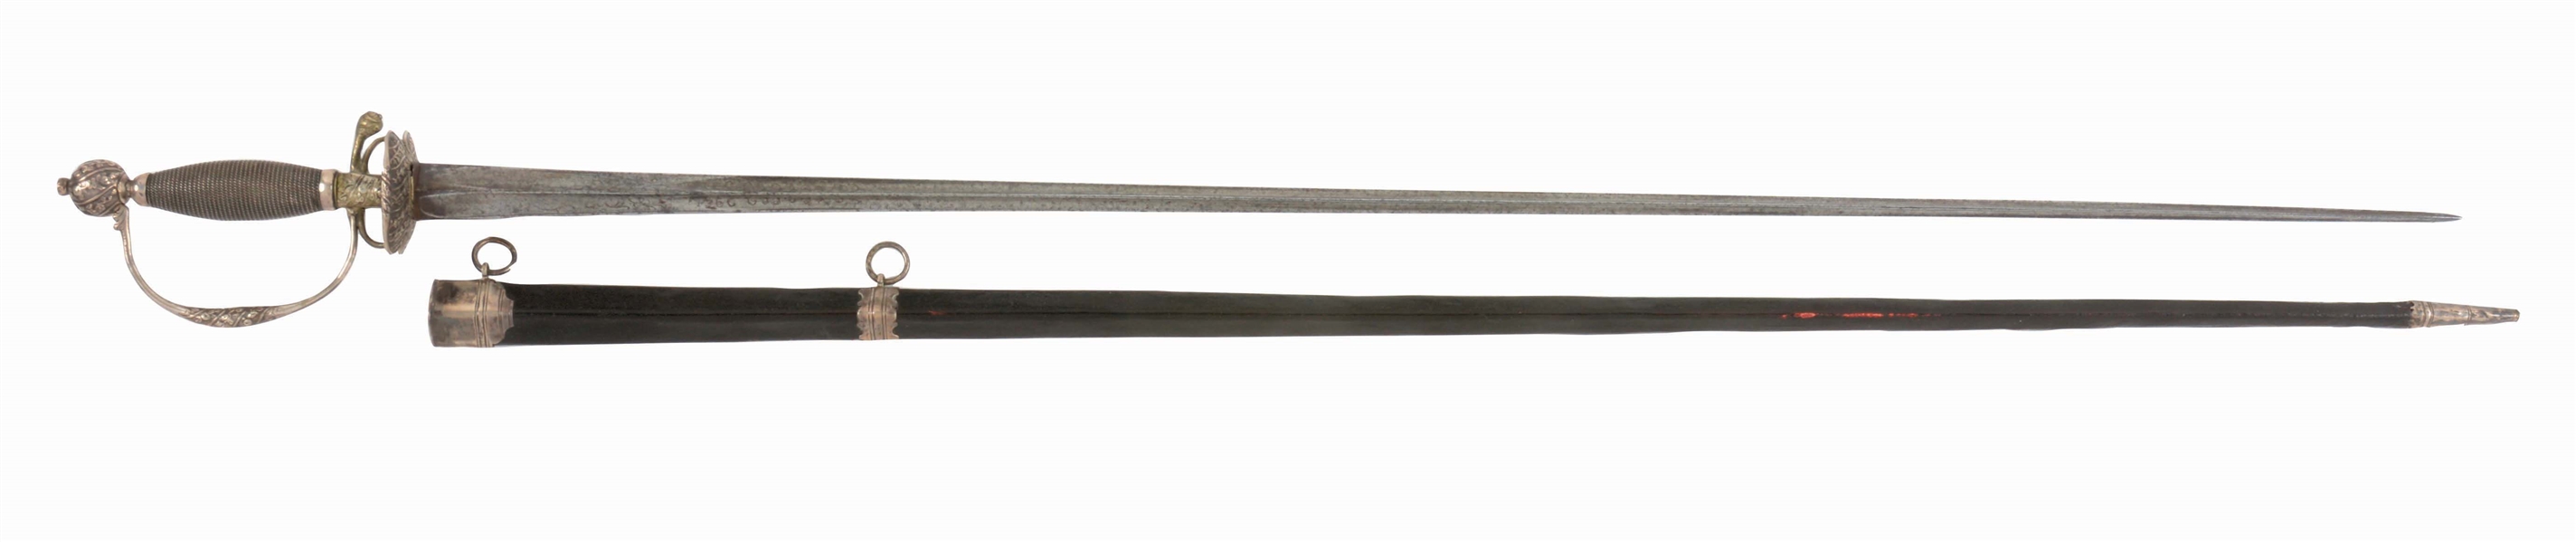 FINELY CHASED SILVER-HILTED EUROPEAN SMALL SWORD WITH SCABBARD.